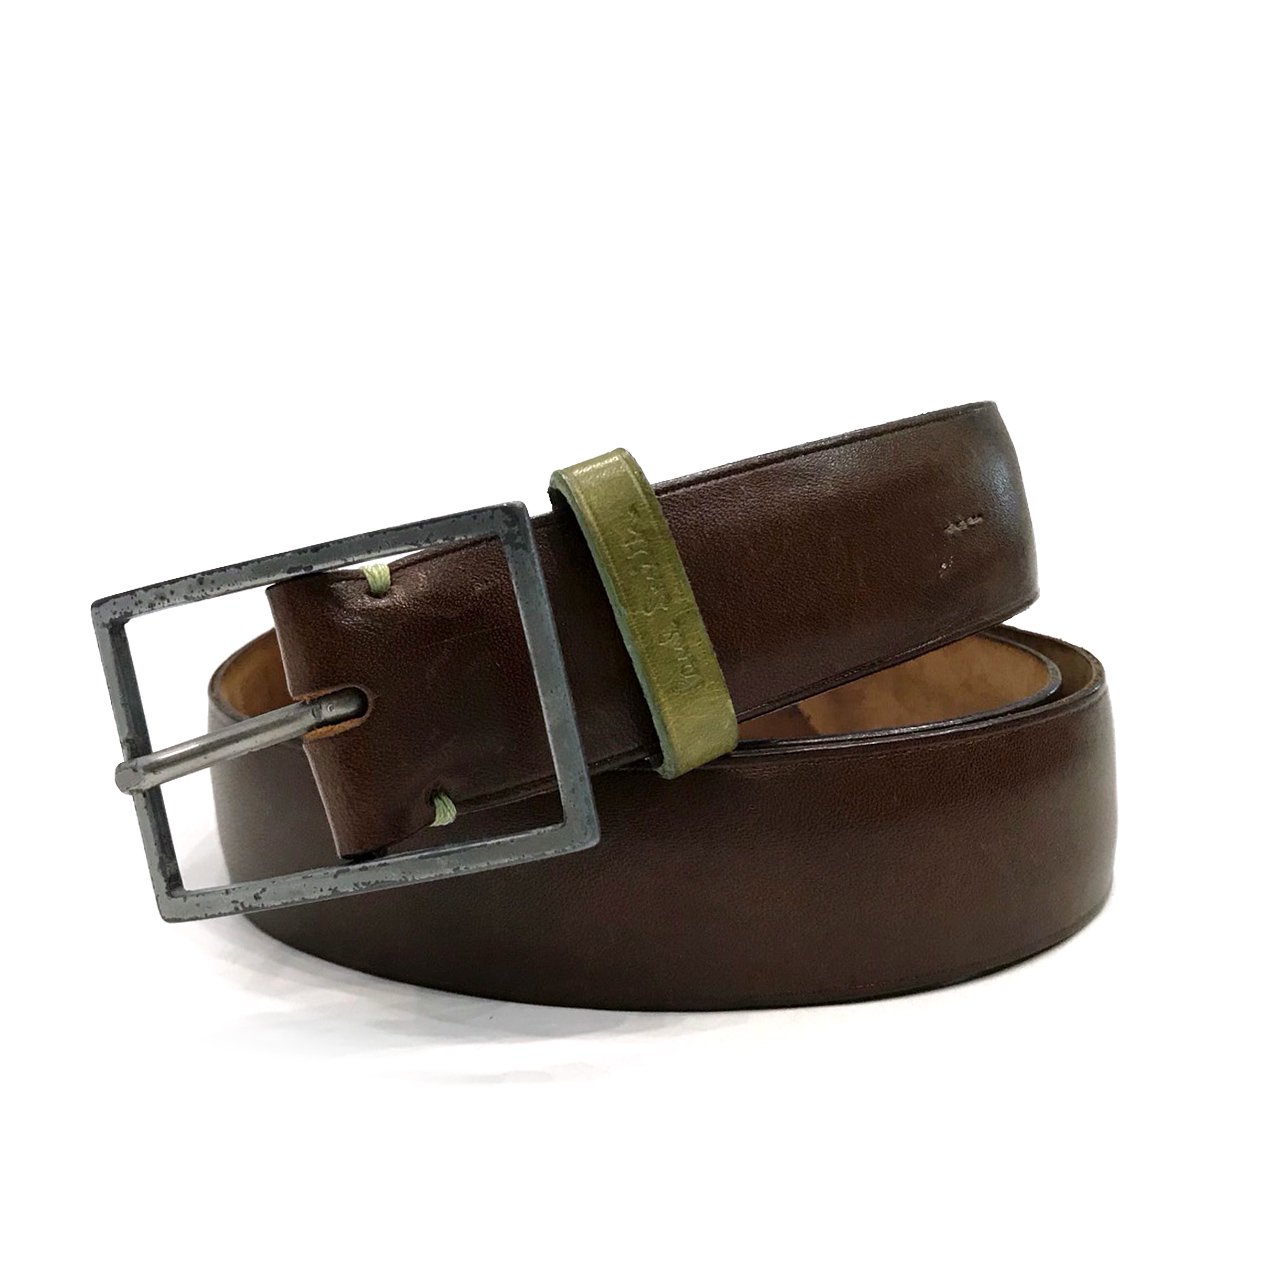 Used Paul Smith Belt 85" in Brown Leather RHW